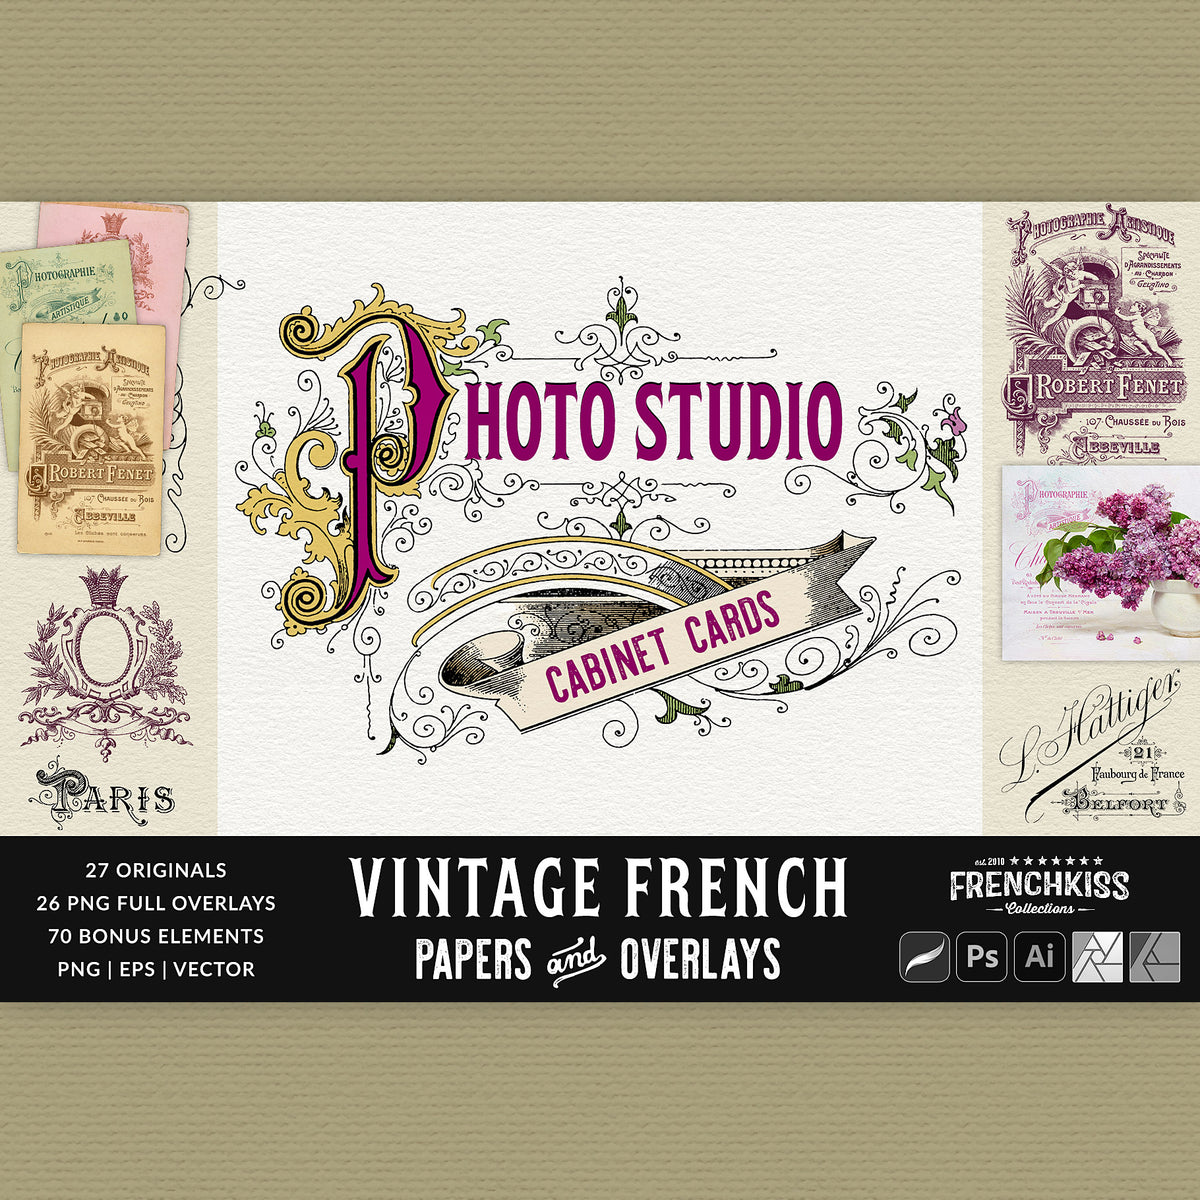 Vintage French Photo Studio Digital Papers and Overlays graphics collection.